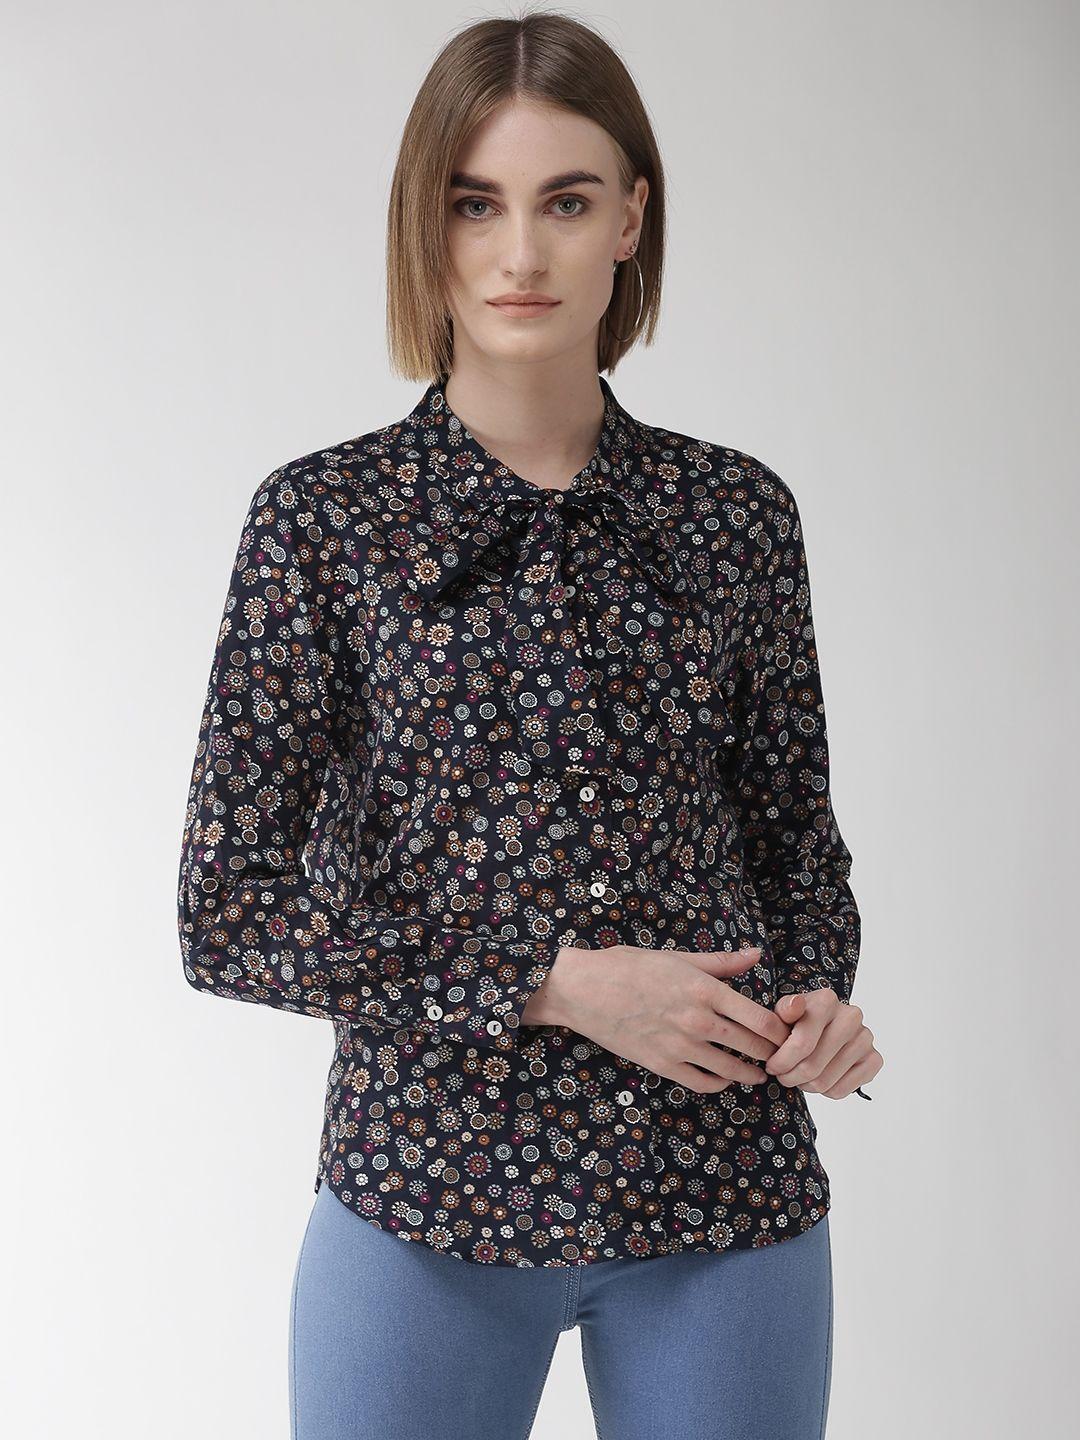 marks & spencer women blue & brown printed pure cotton shirt style pure cotton top